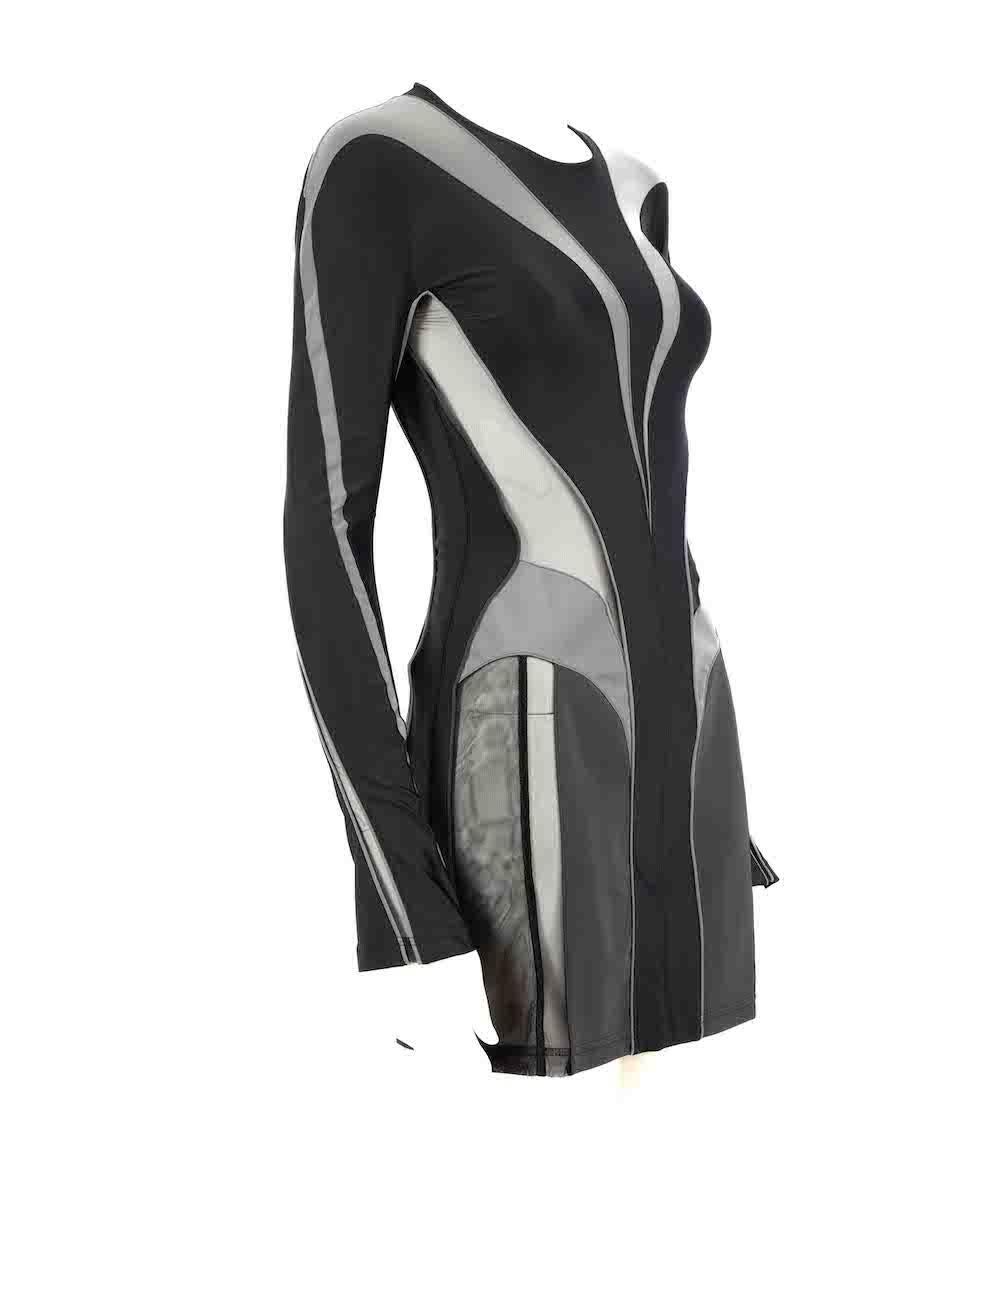 CONDITION is Very good. Hardly any visible wear to dress is evident on this used Mugler designer resale item.
 
 
 
 Details
 
 
 Black
 
 Synthetic
 
 Bodycon dress
 
 Grey reflective panels
 
 Mesh panels
 
 Long sleeves
 
 Round neckline
 
